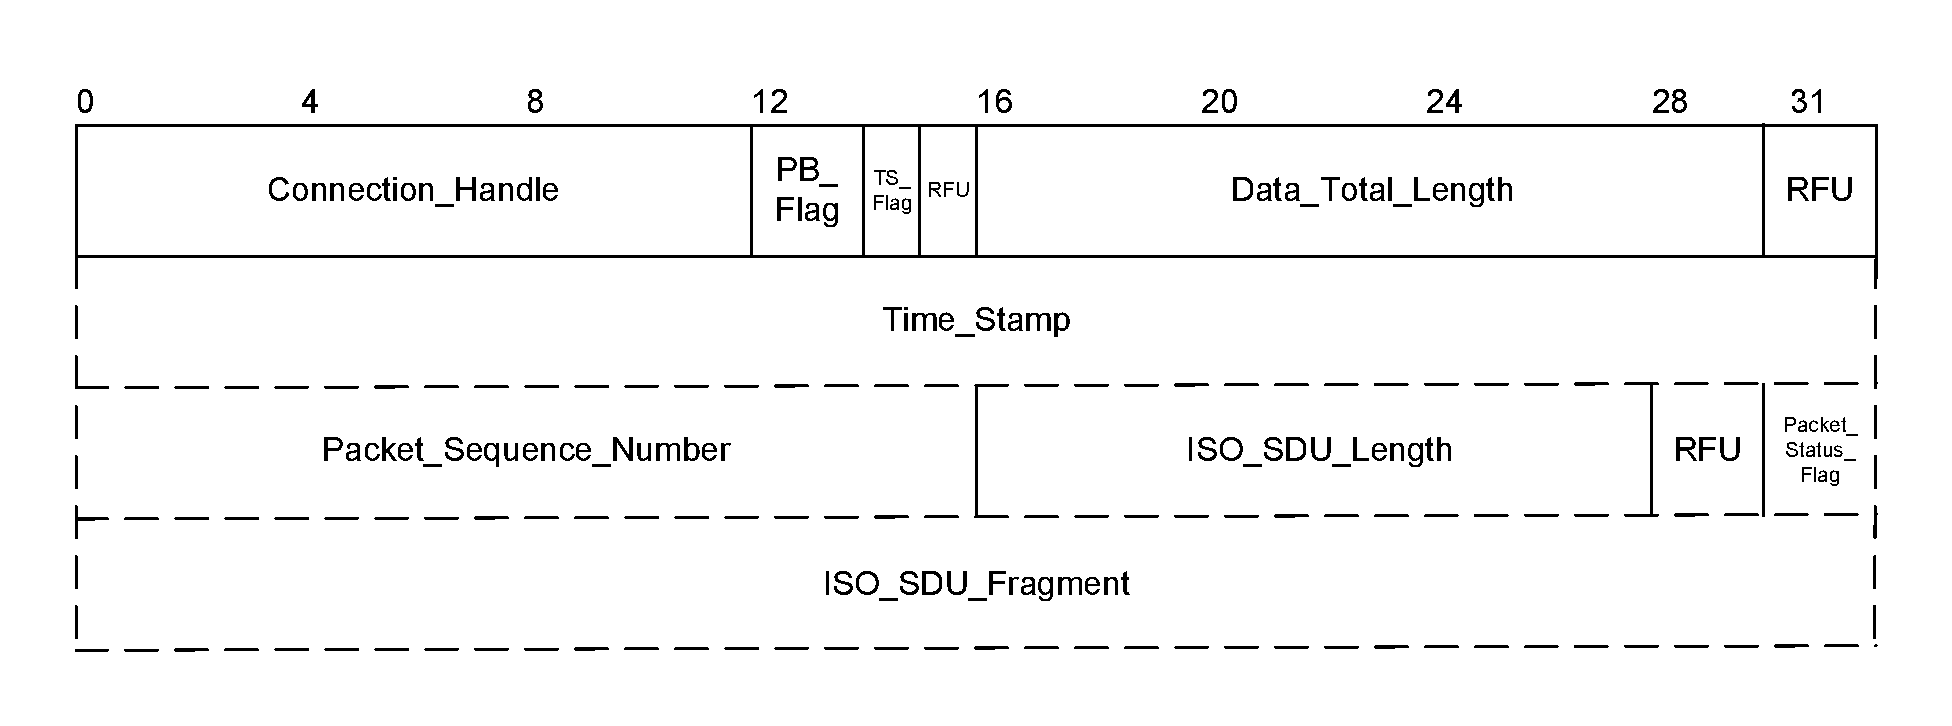 Format of an HCI ISO Data packet